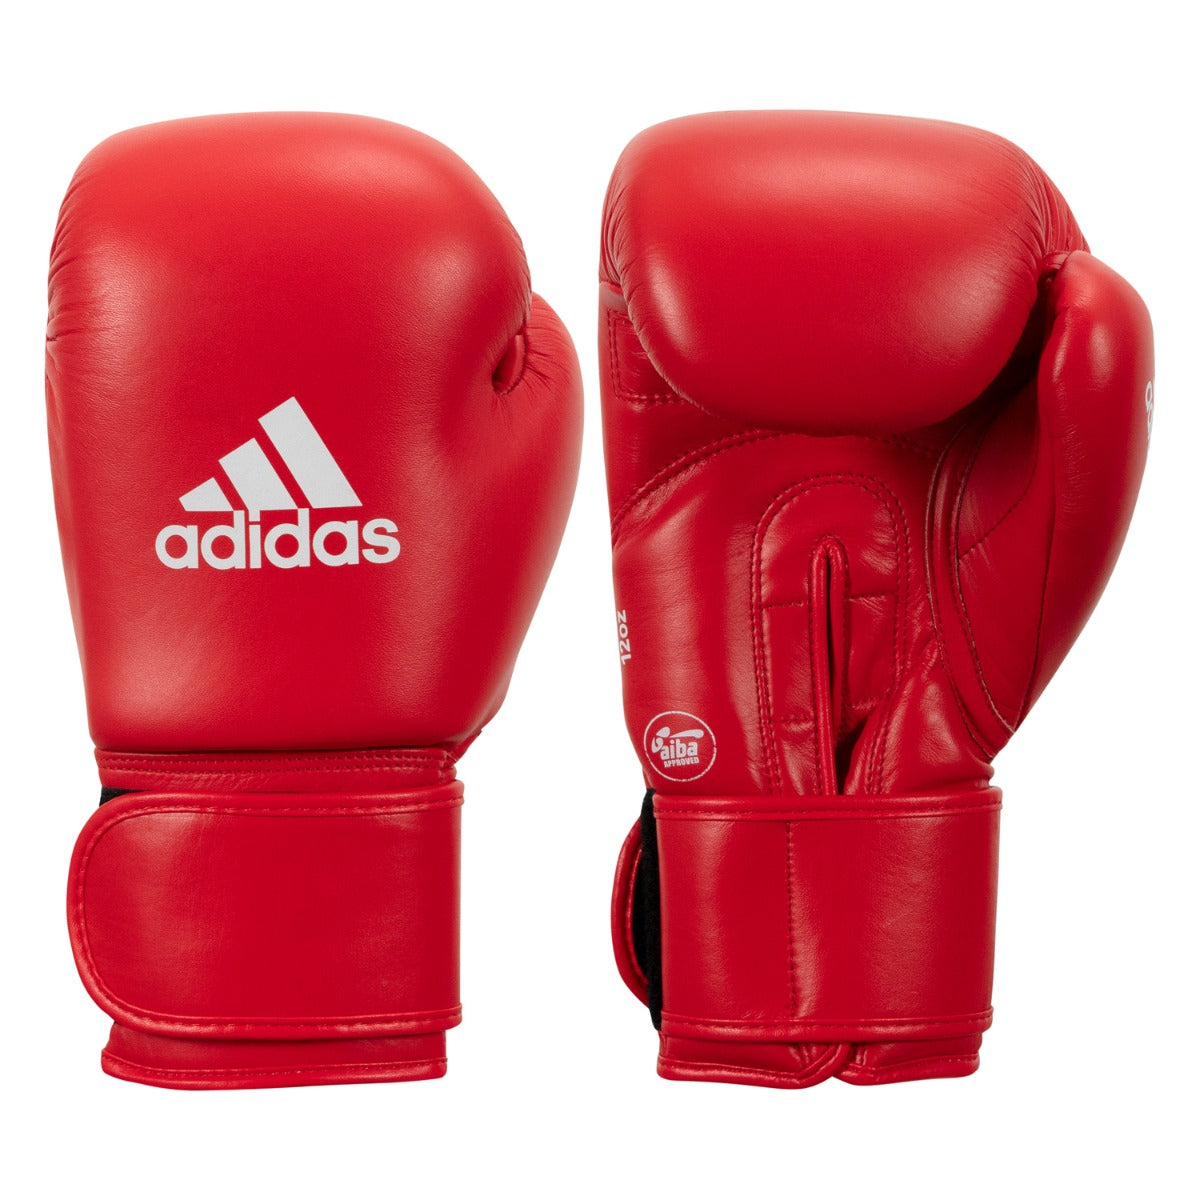 draaipunt Expertise shuttle adidas AIBA Amateur Competition Gloves | TITLE Boxing Gear